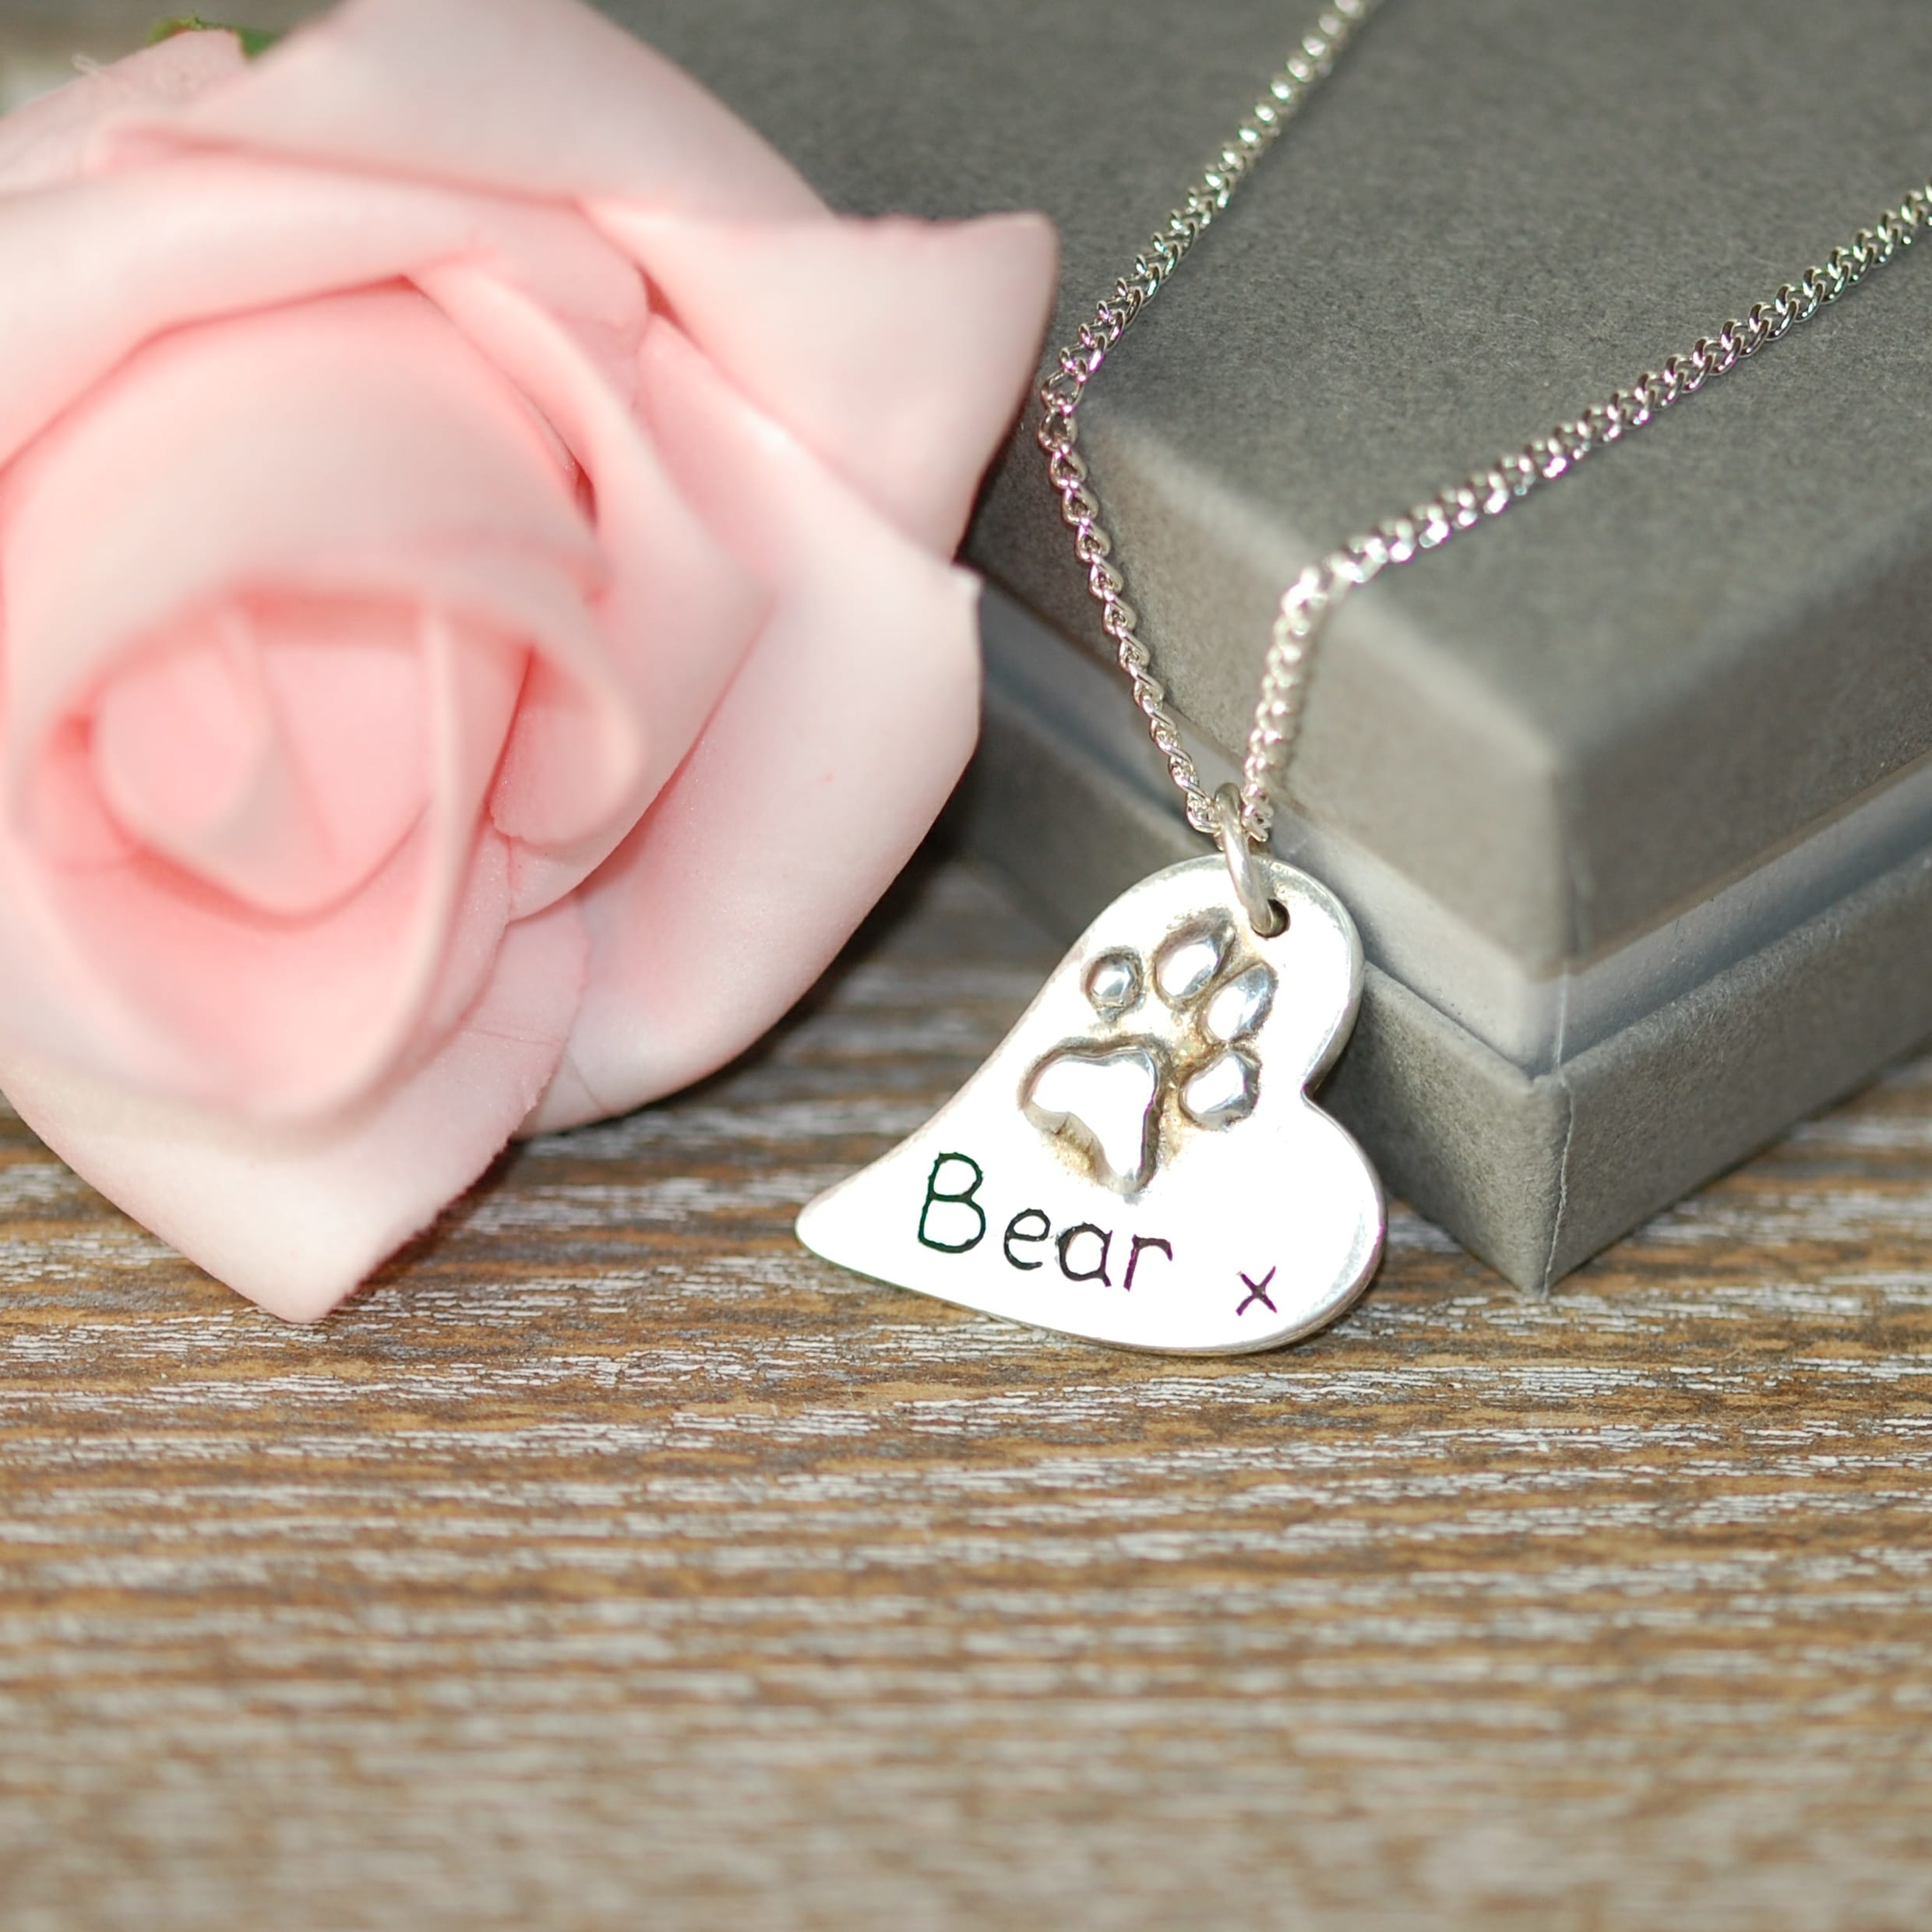 Regular raised paw print charm made from silver clay